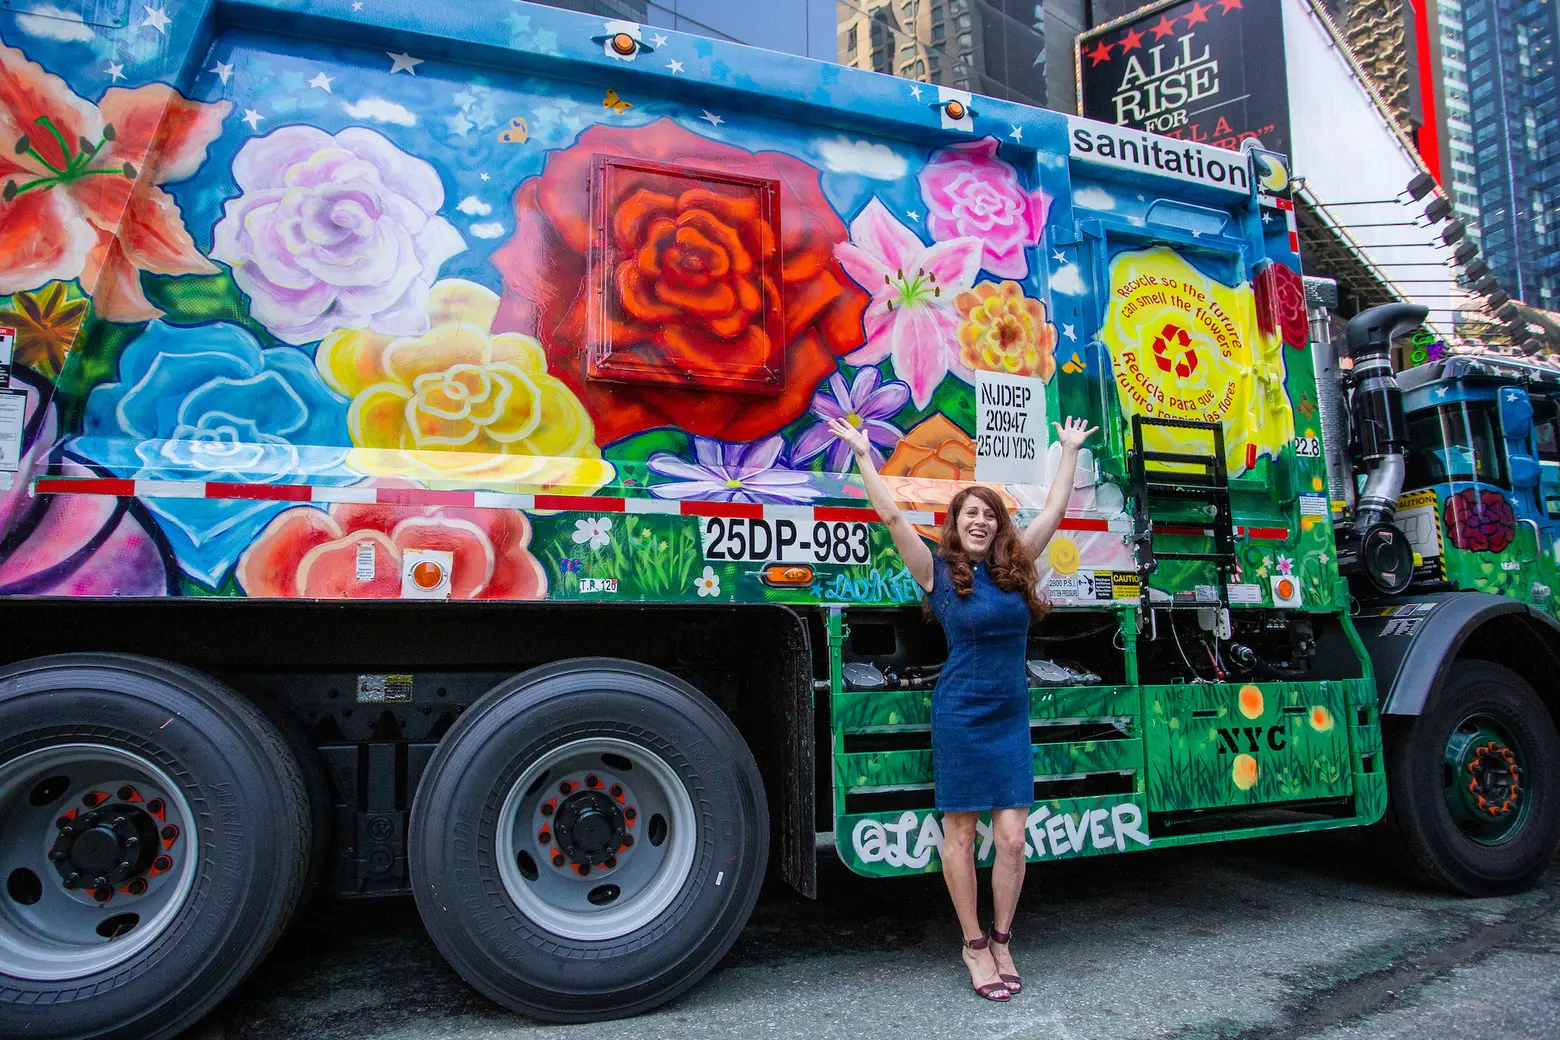 NYC is looking for volunteer artists to paint its garbage trucks